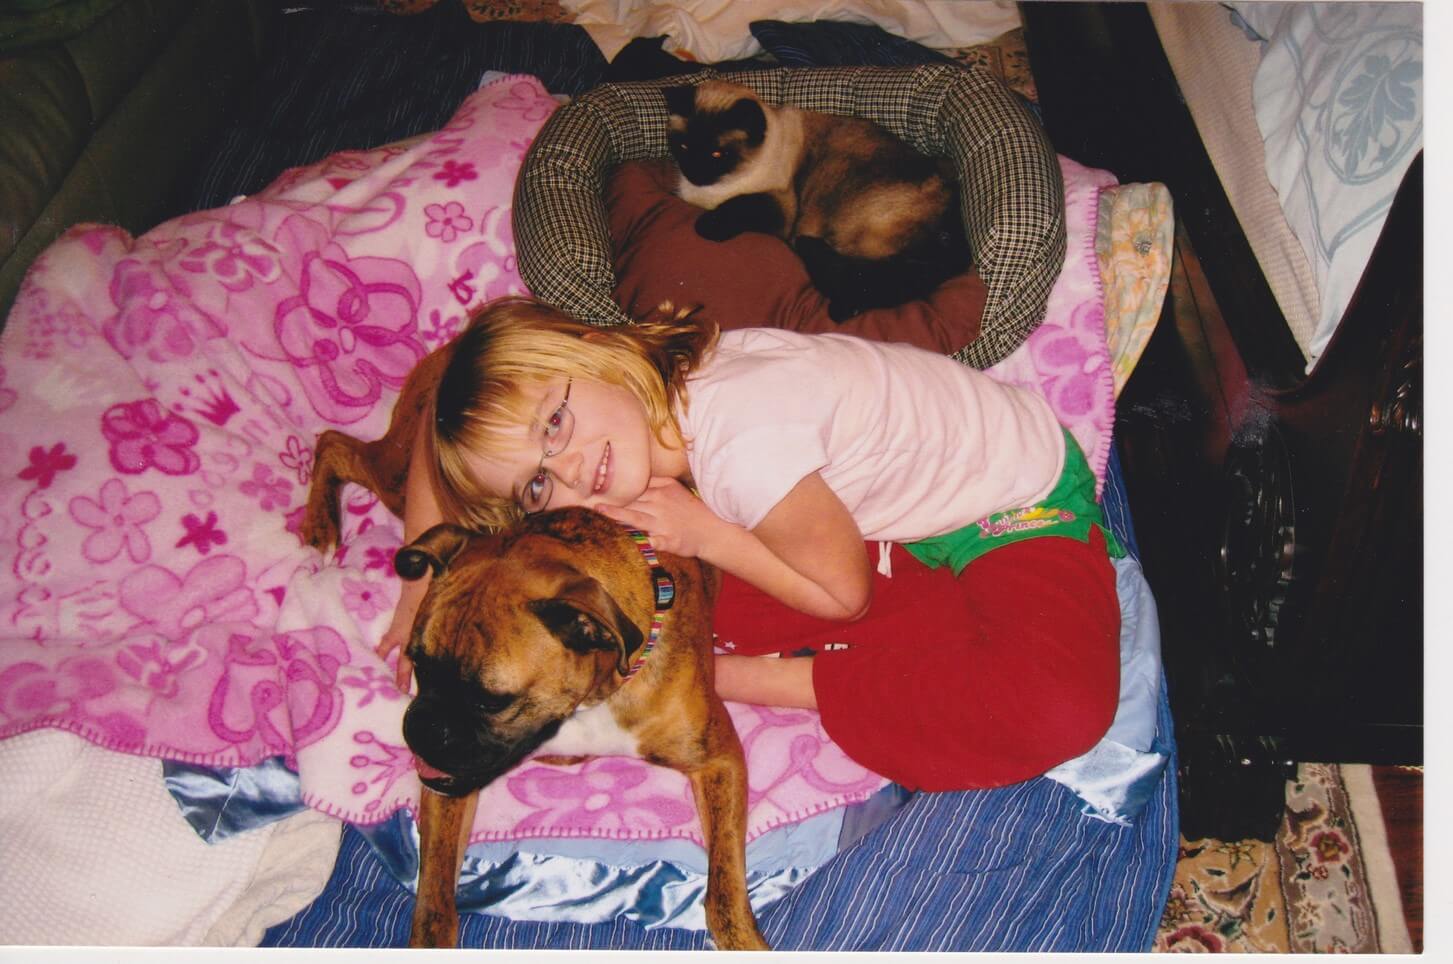 For years our family slept together in the Master bedroom- pets and all